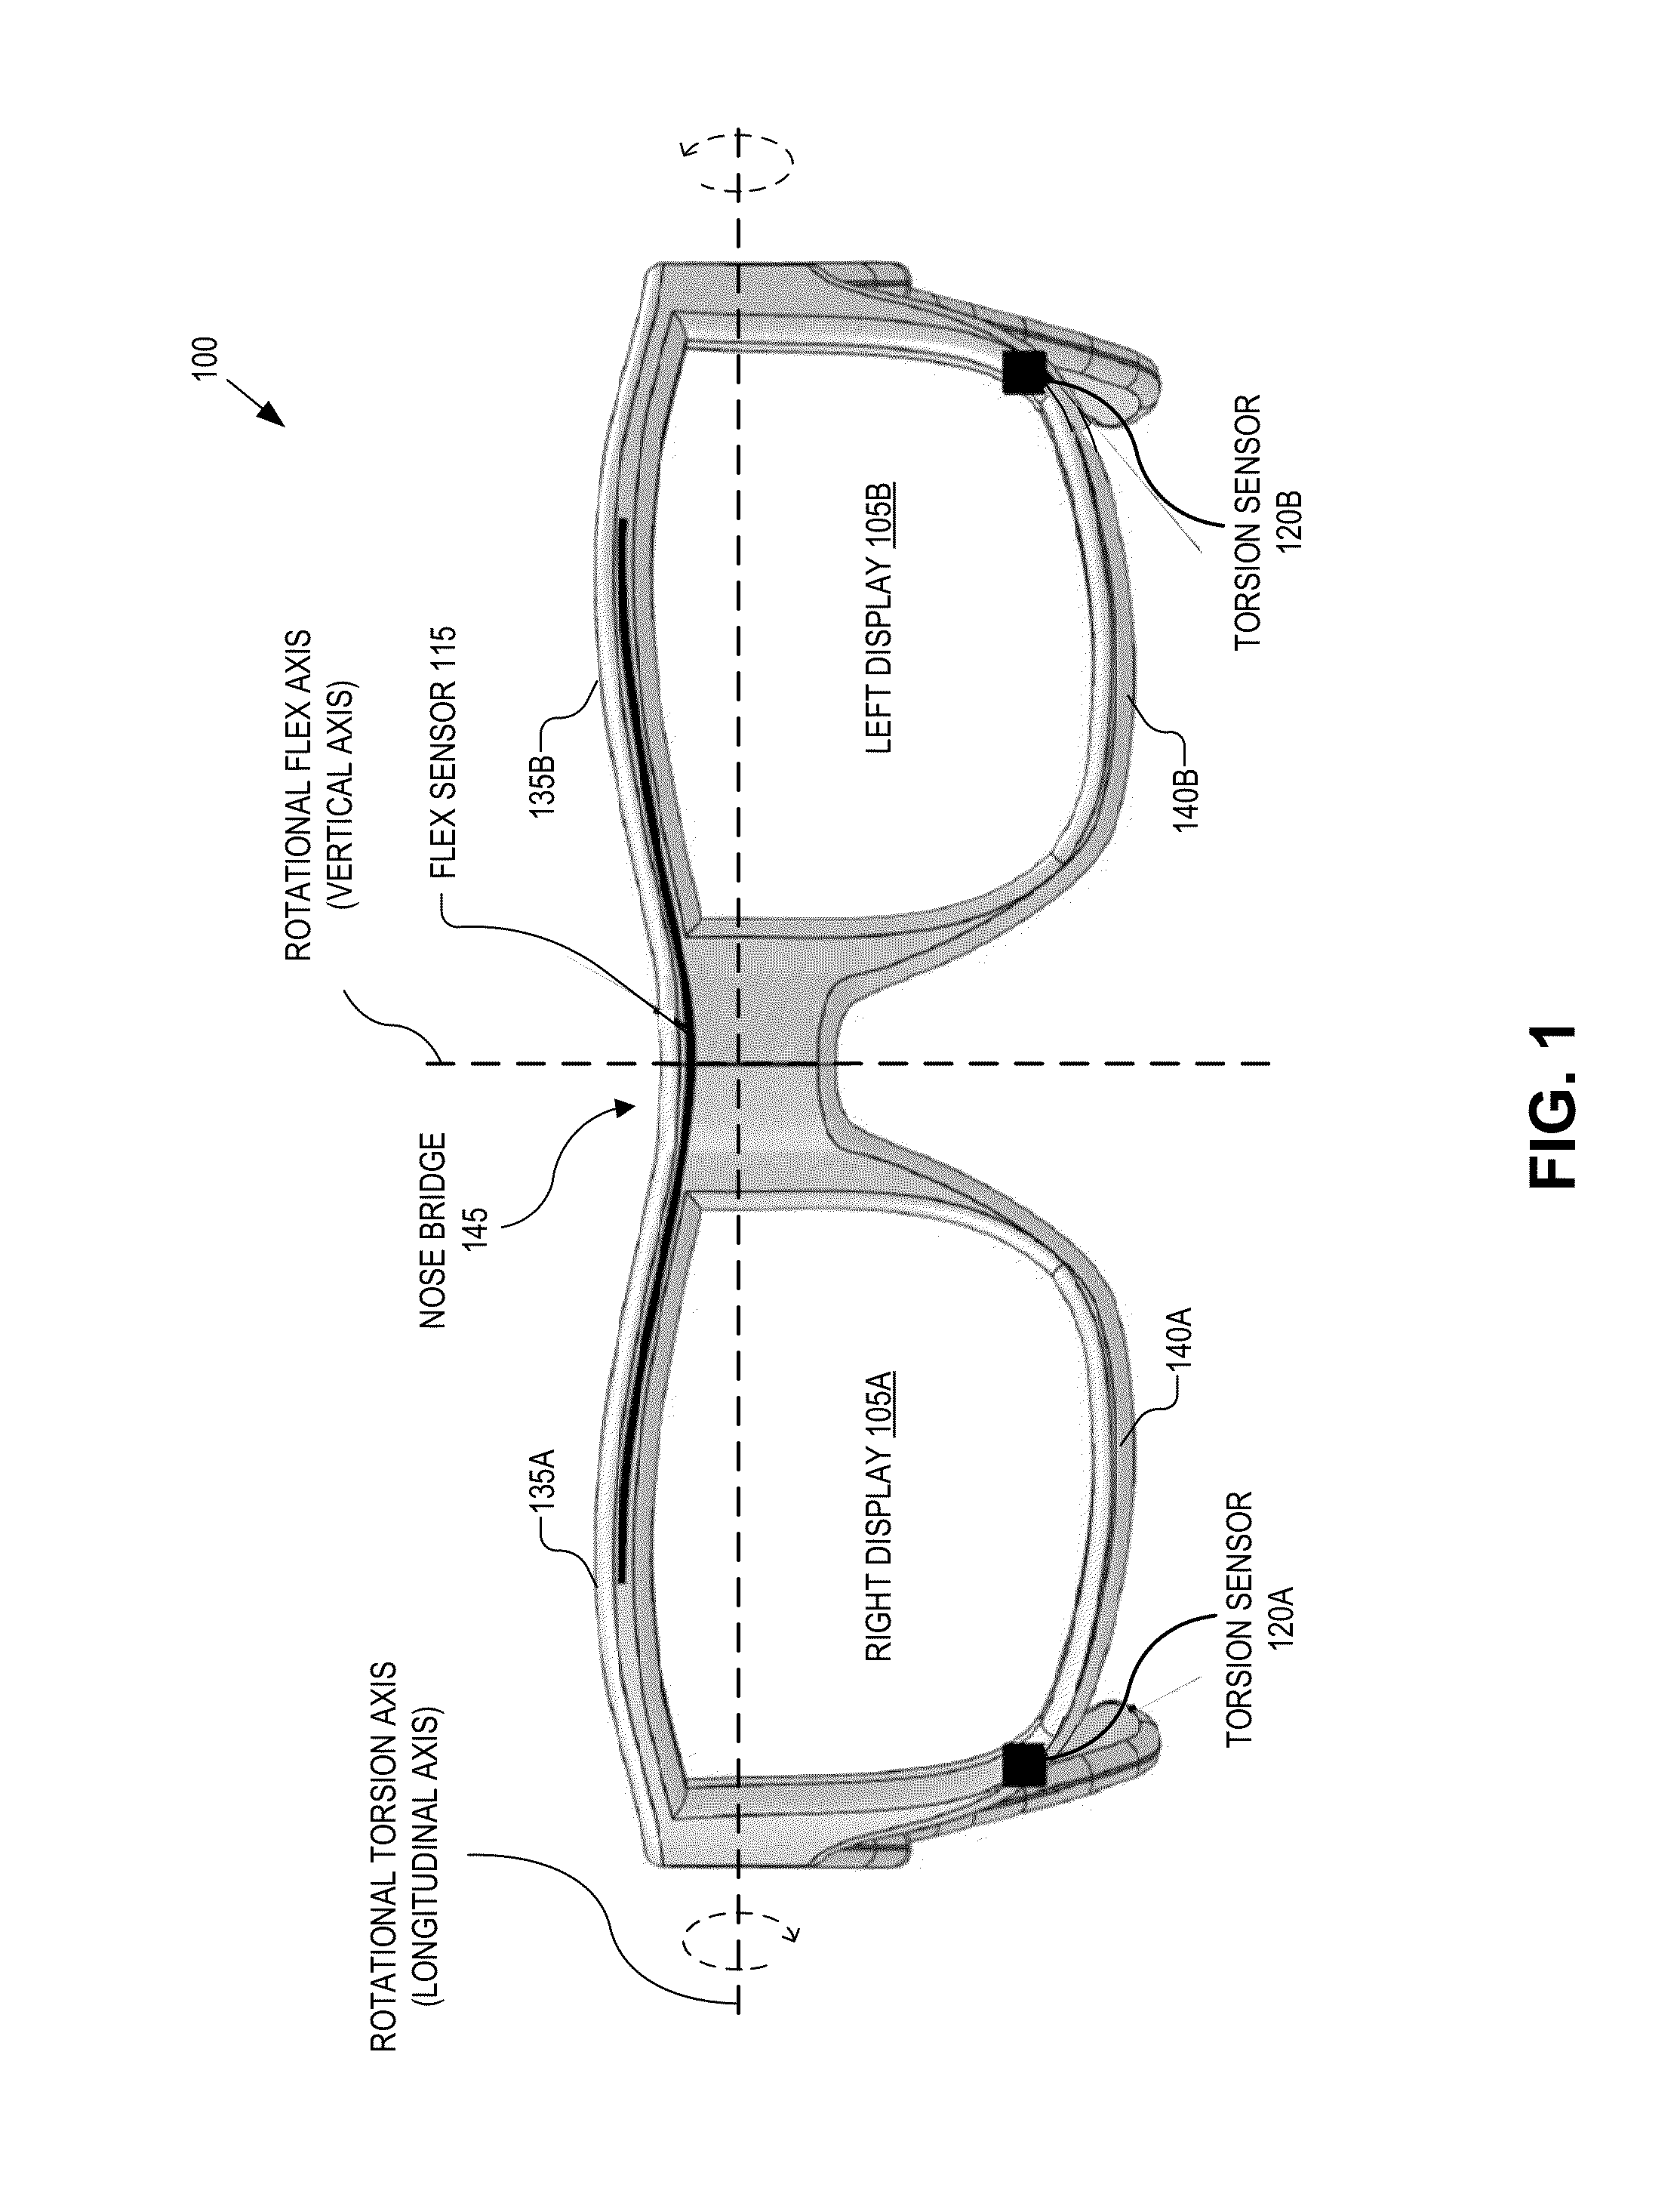 Head mounted display with deformation sensors